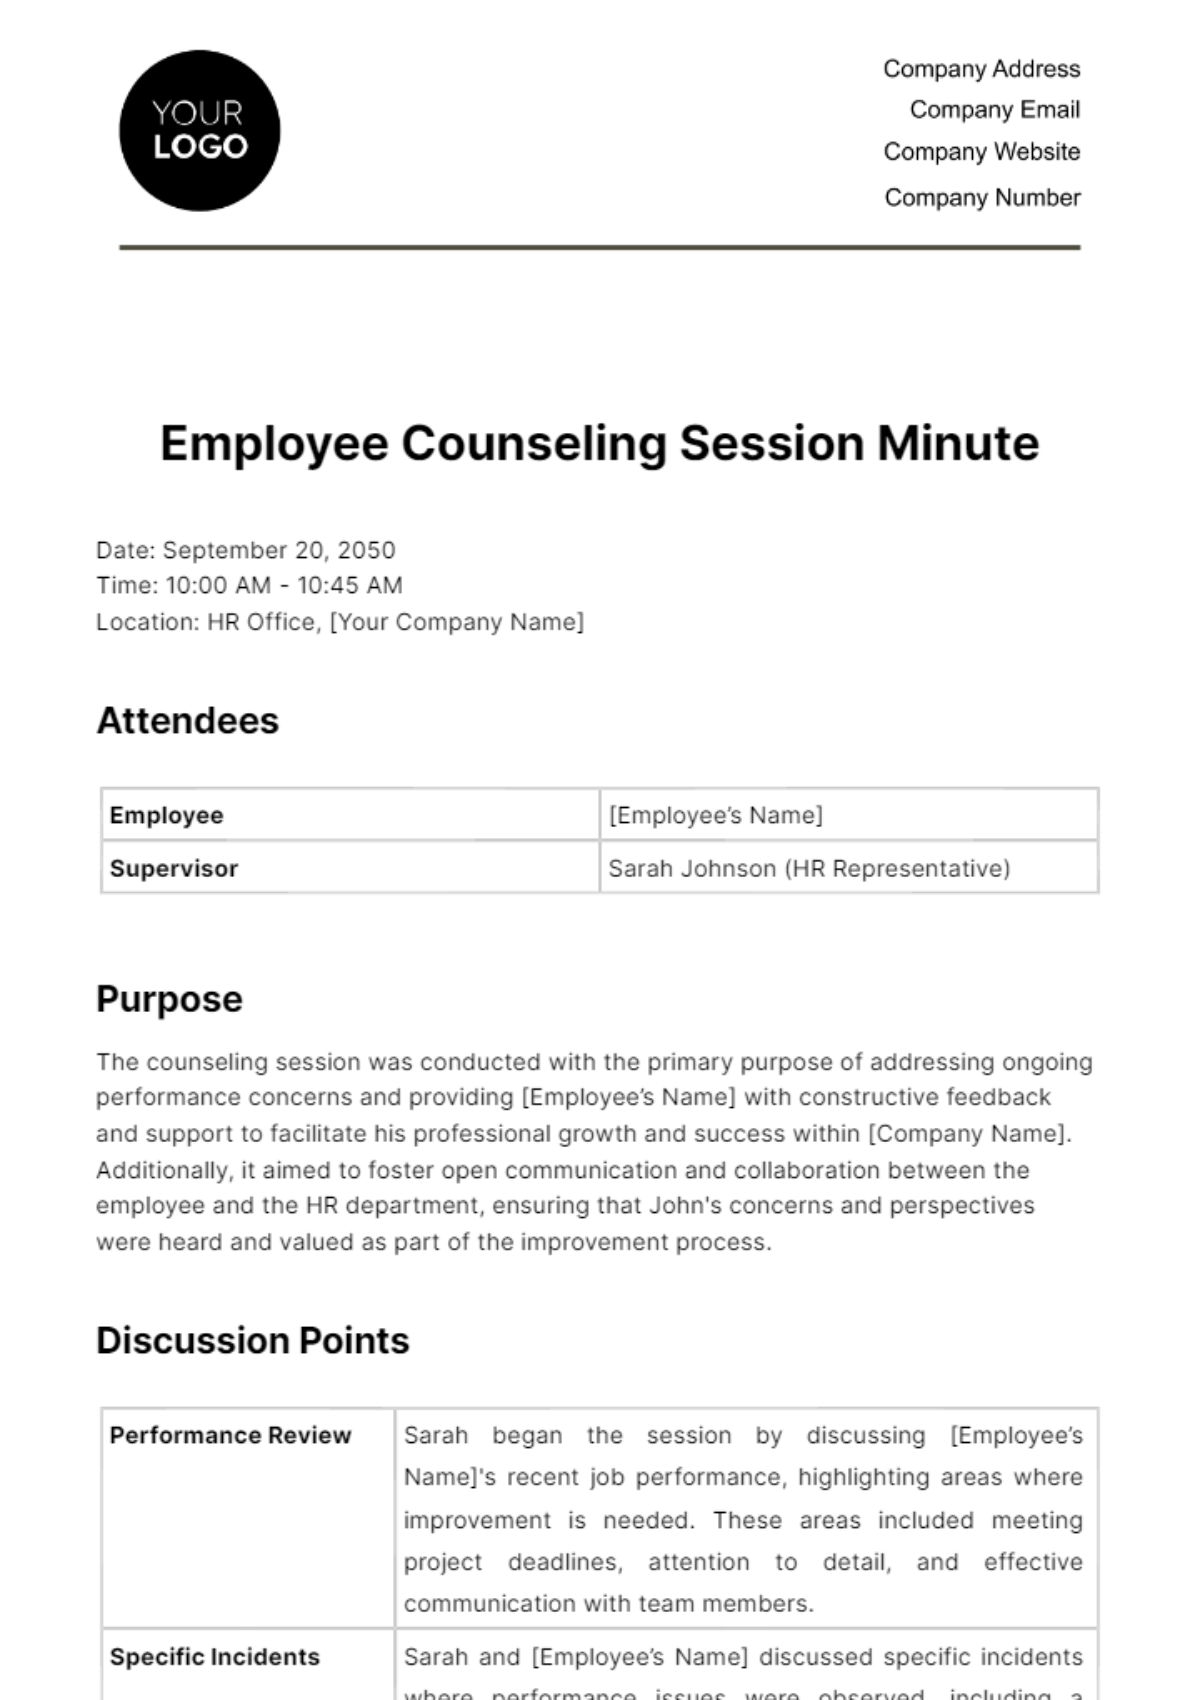 Free Employee Counseling Session Minute HR Template